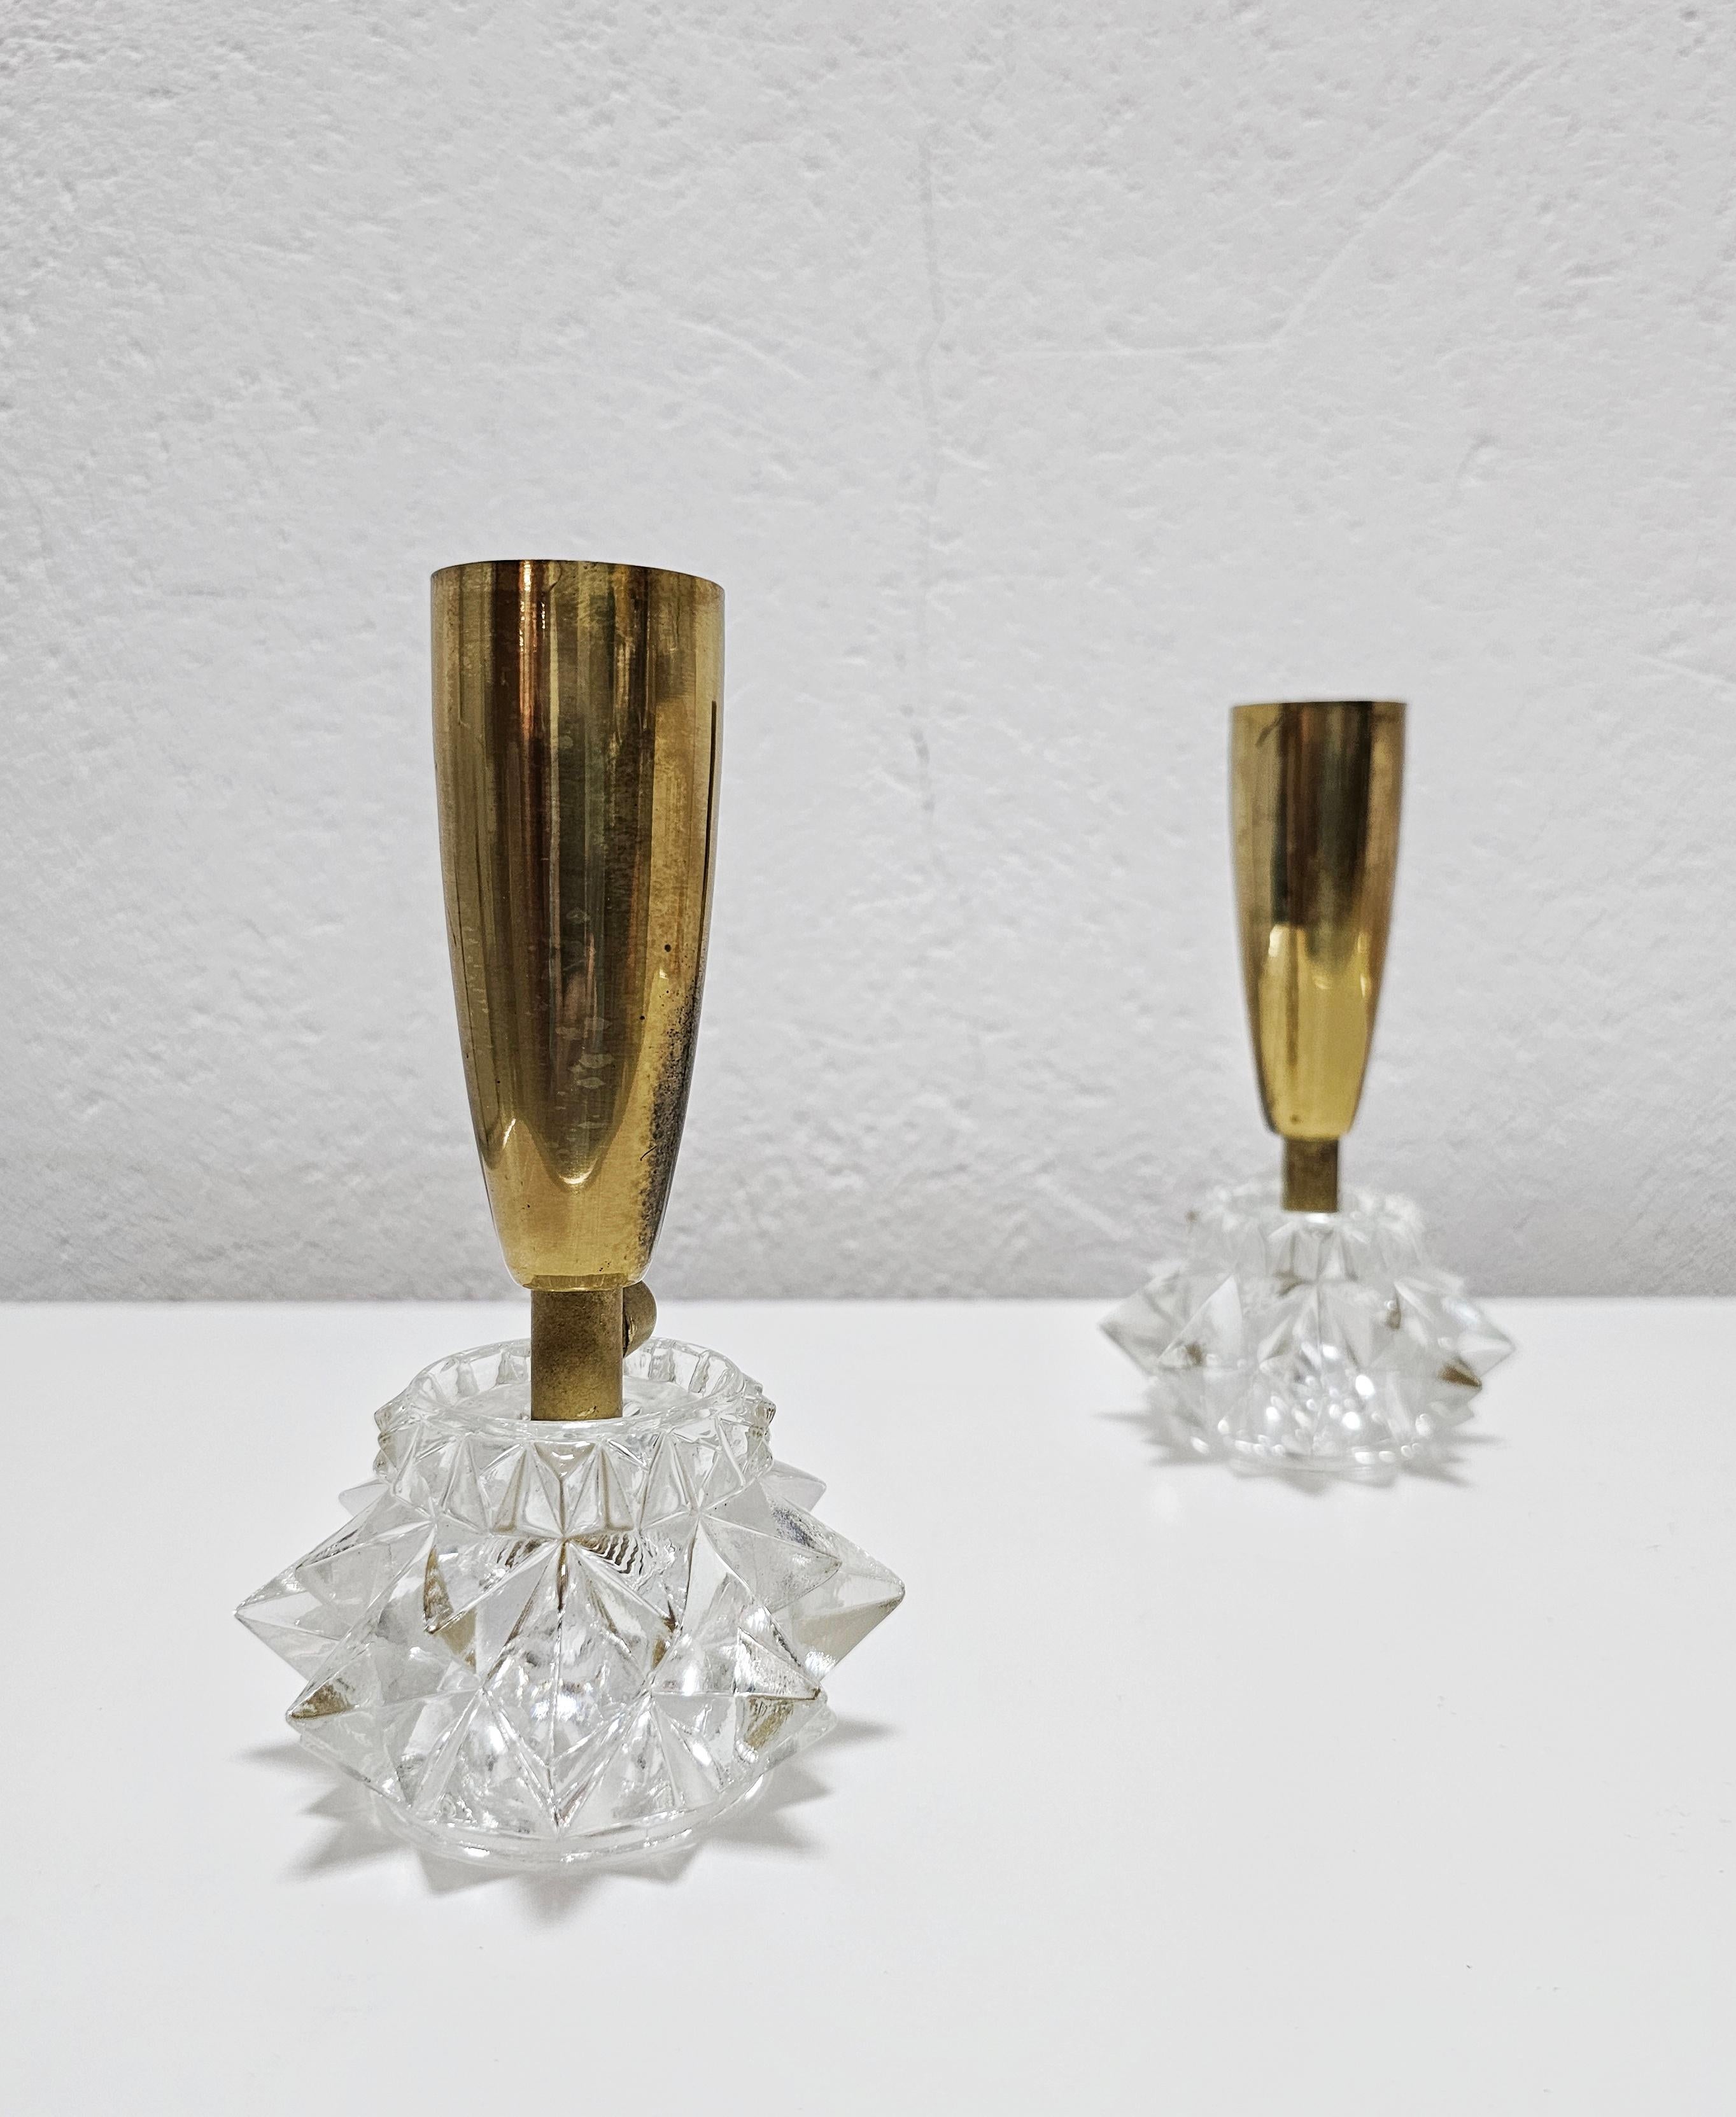 In this listing you will find a pair of miniature Mid Century Modern table lamps done in brass, with the glass bases. Each lamp has one light, requiring am E14 light bulb with a European screw. Made in Austria in 1960s. 

Very good vintage